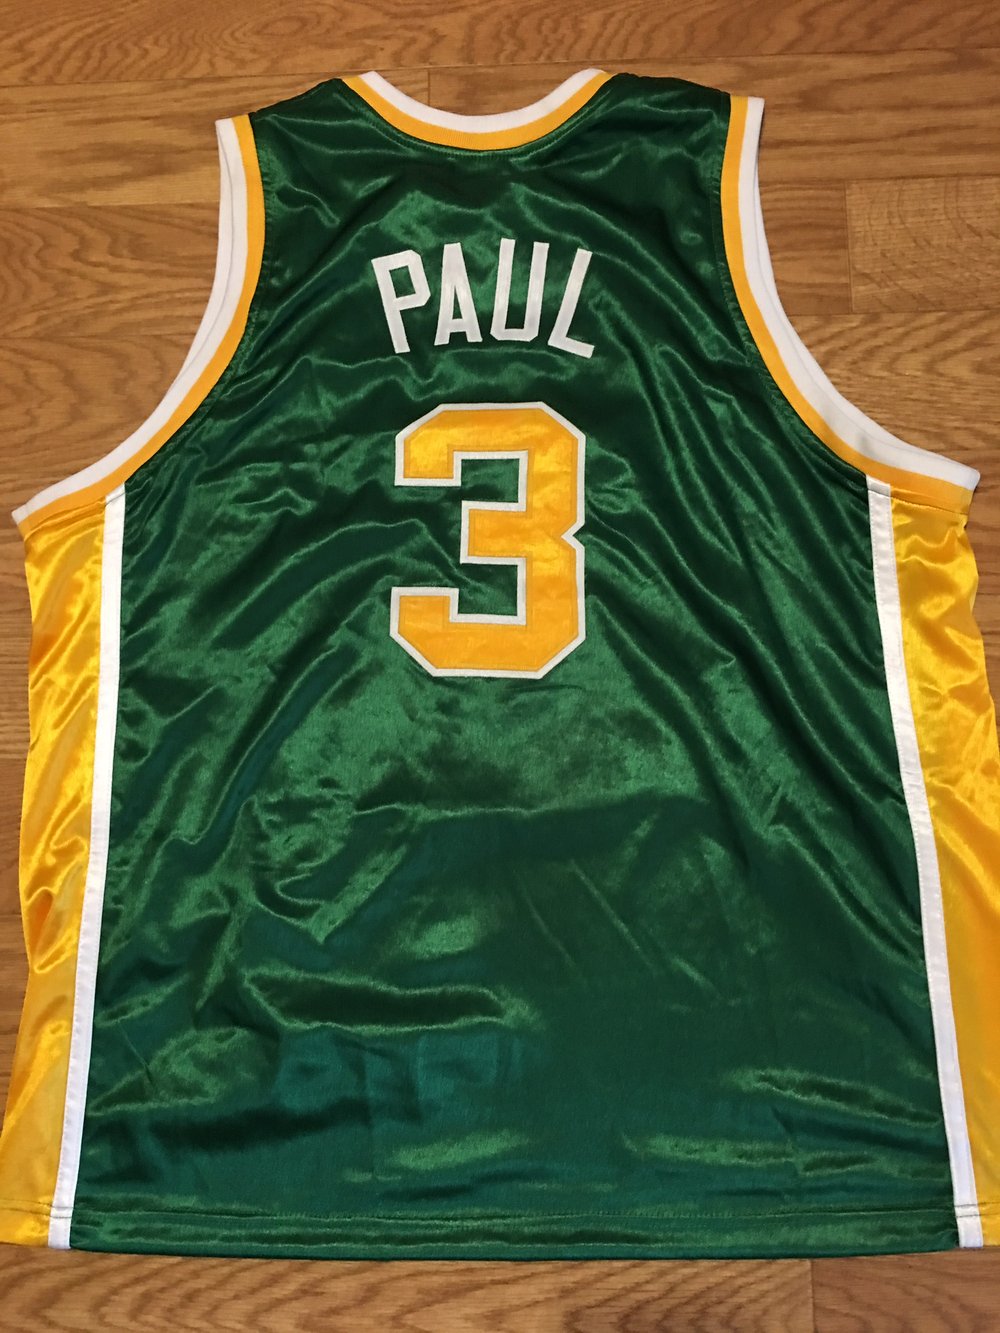 Image of Chris Paul West Forsyth HS (Grandfather tribute)